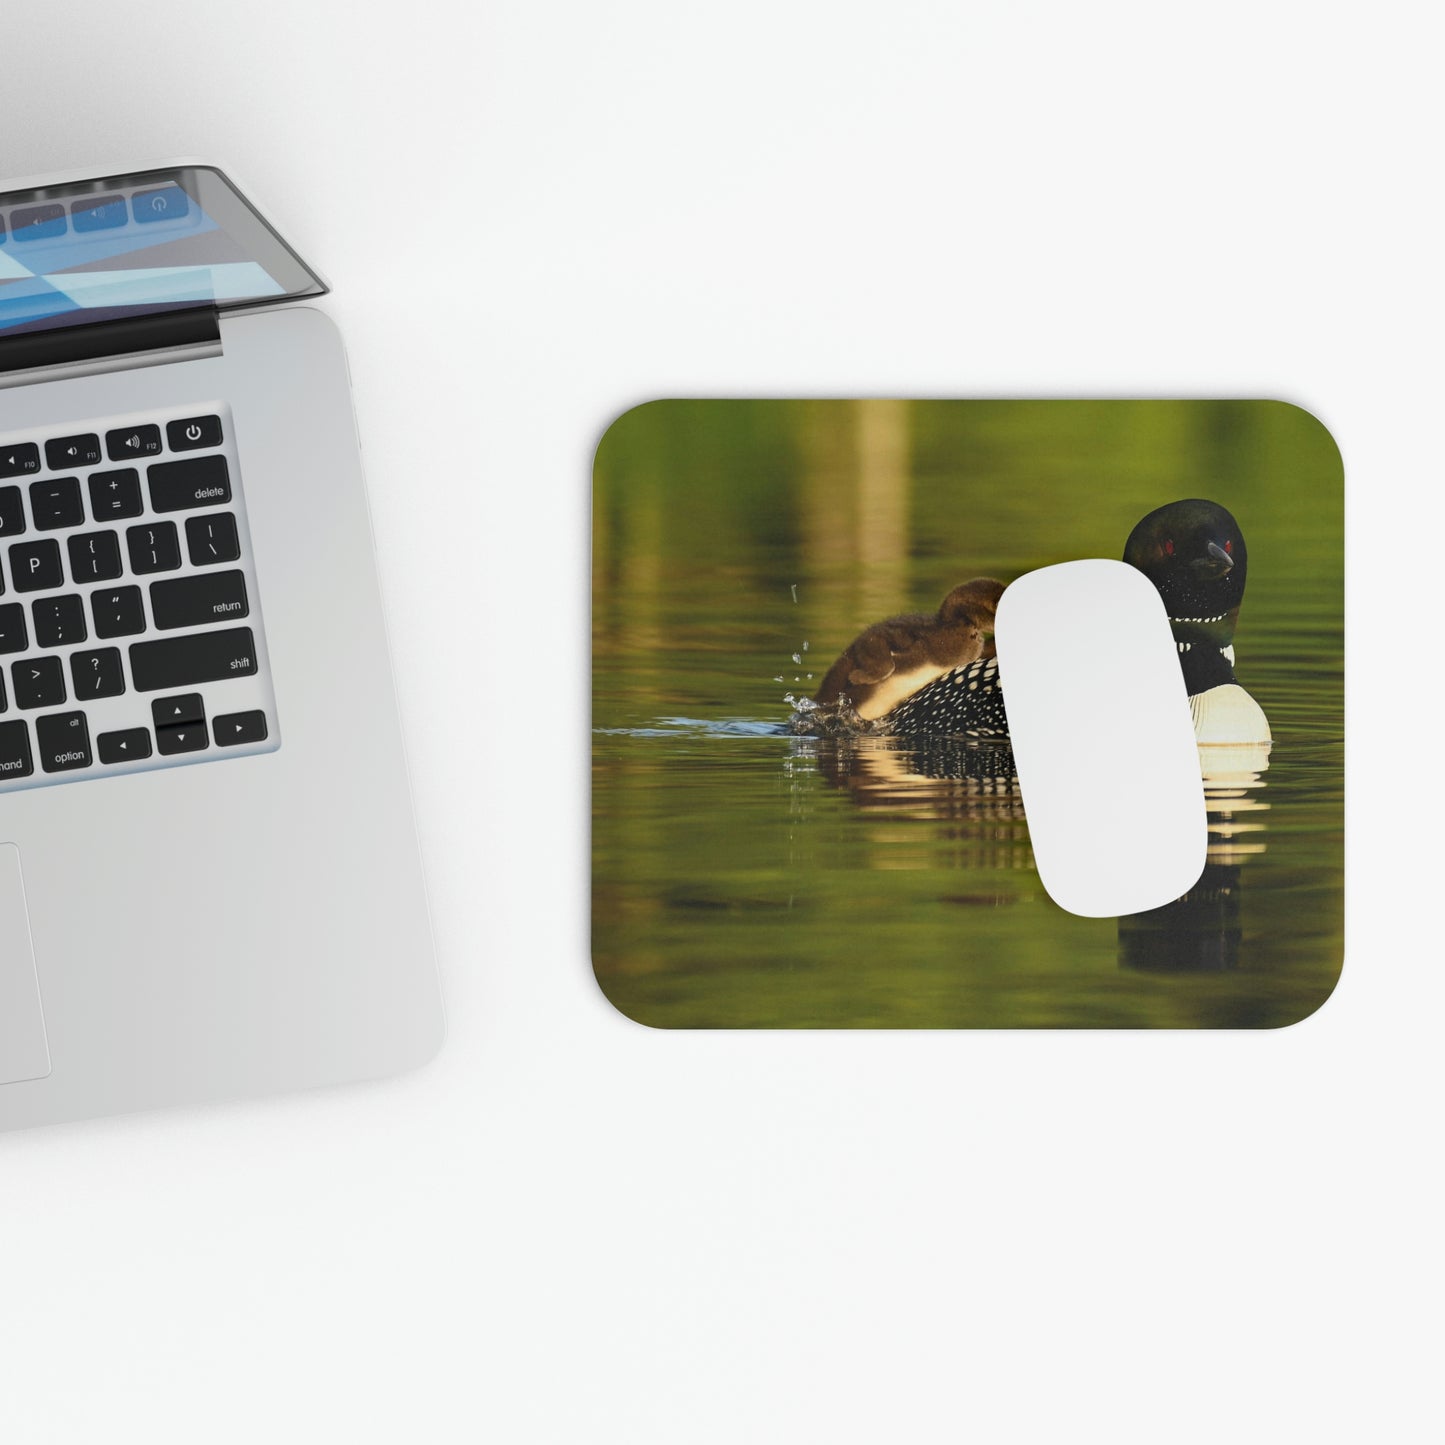 Loon & Babies Mouse Pad